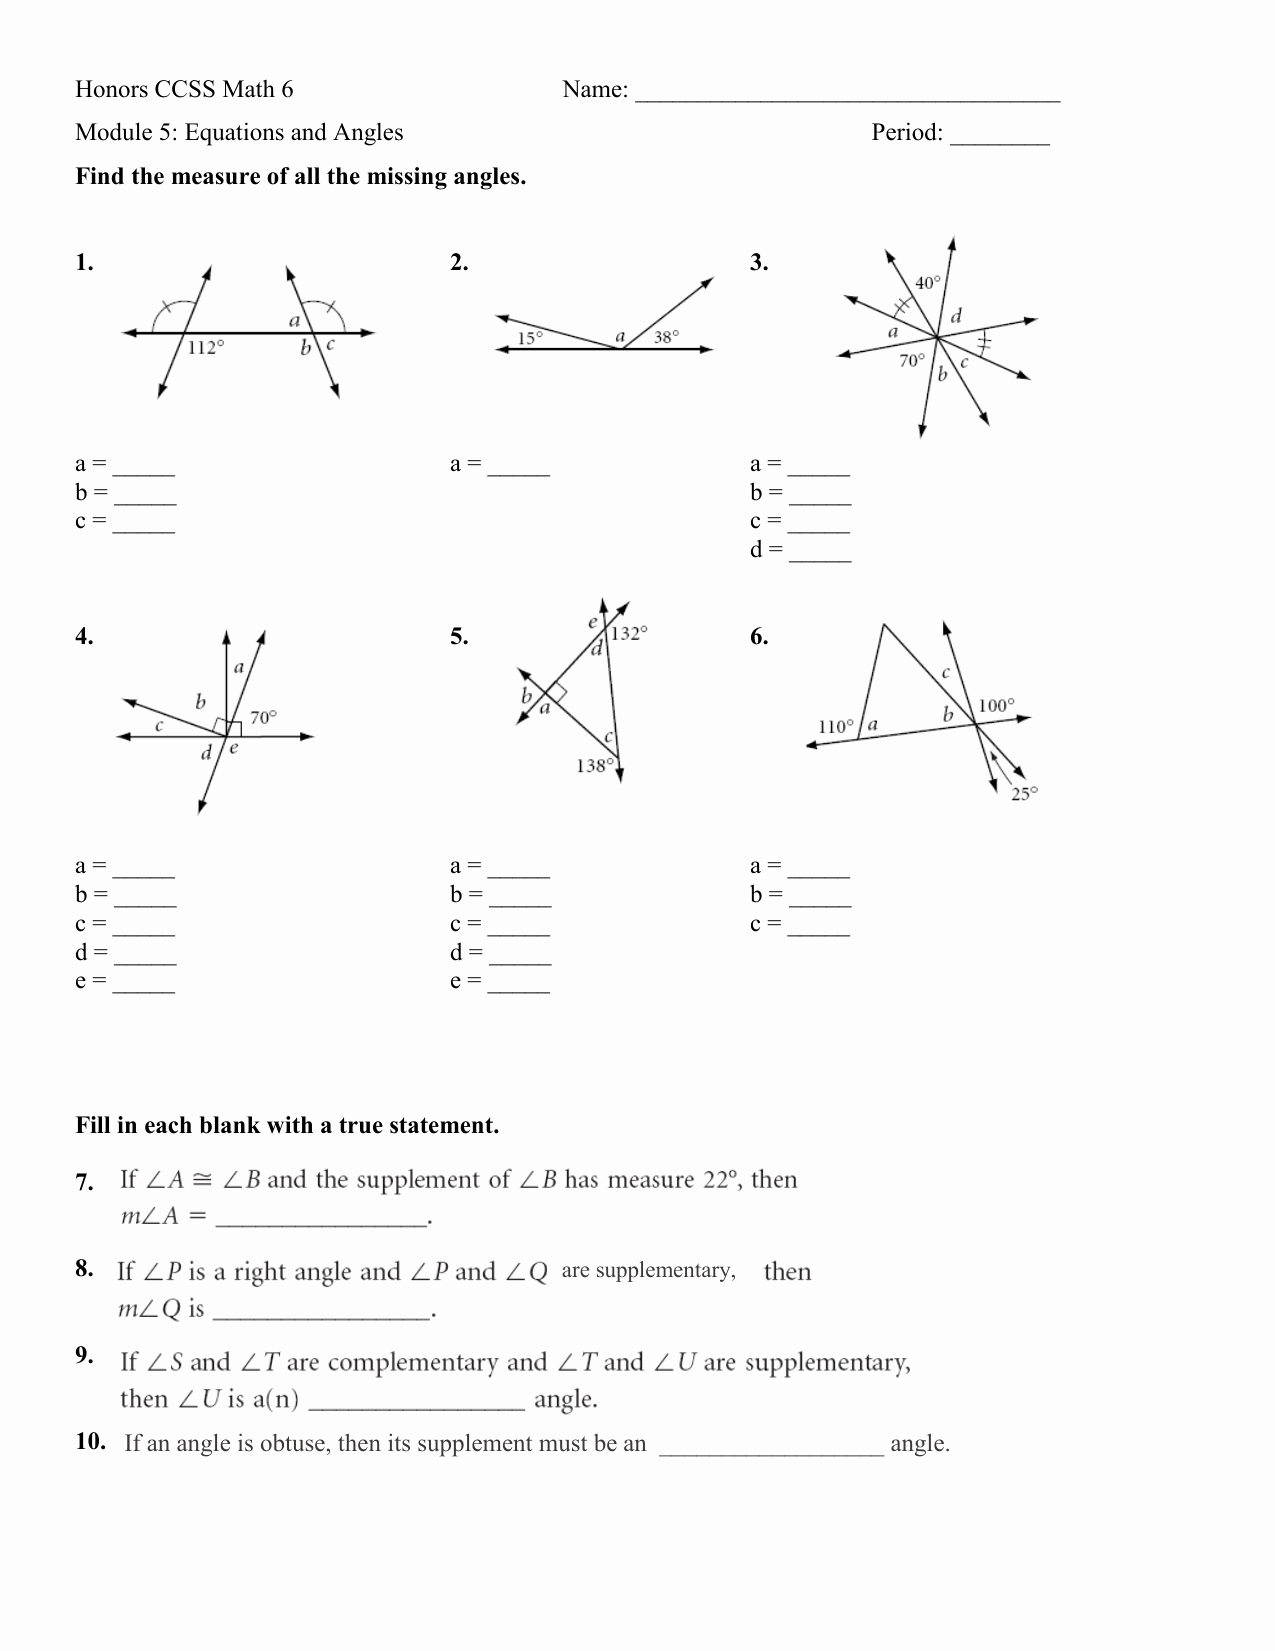 Find the Missing Angle Worksheet Fresh Finding Missing Angles Worksheet Geometry